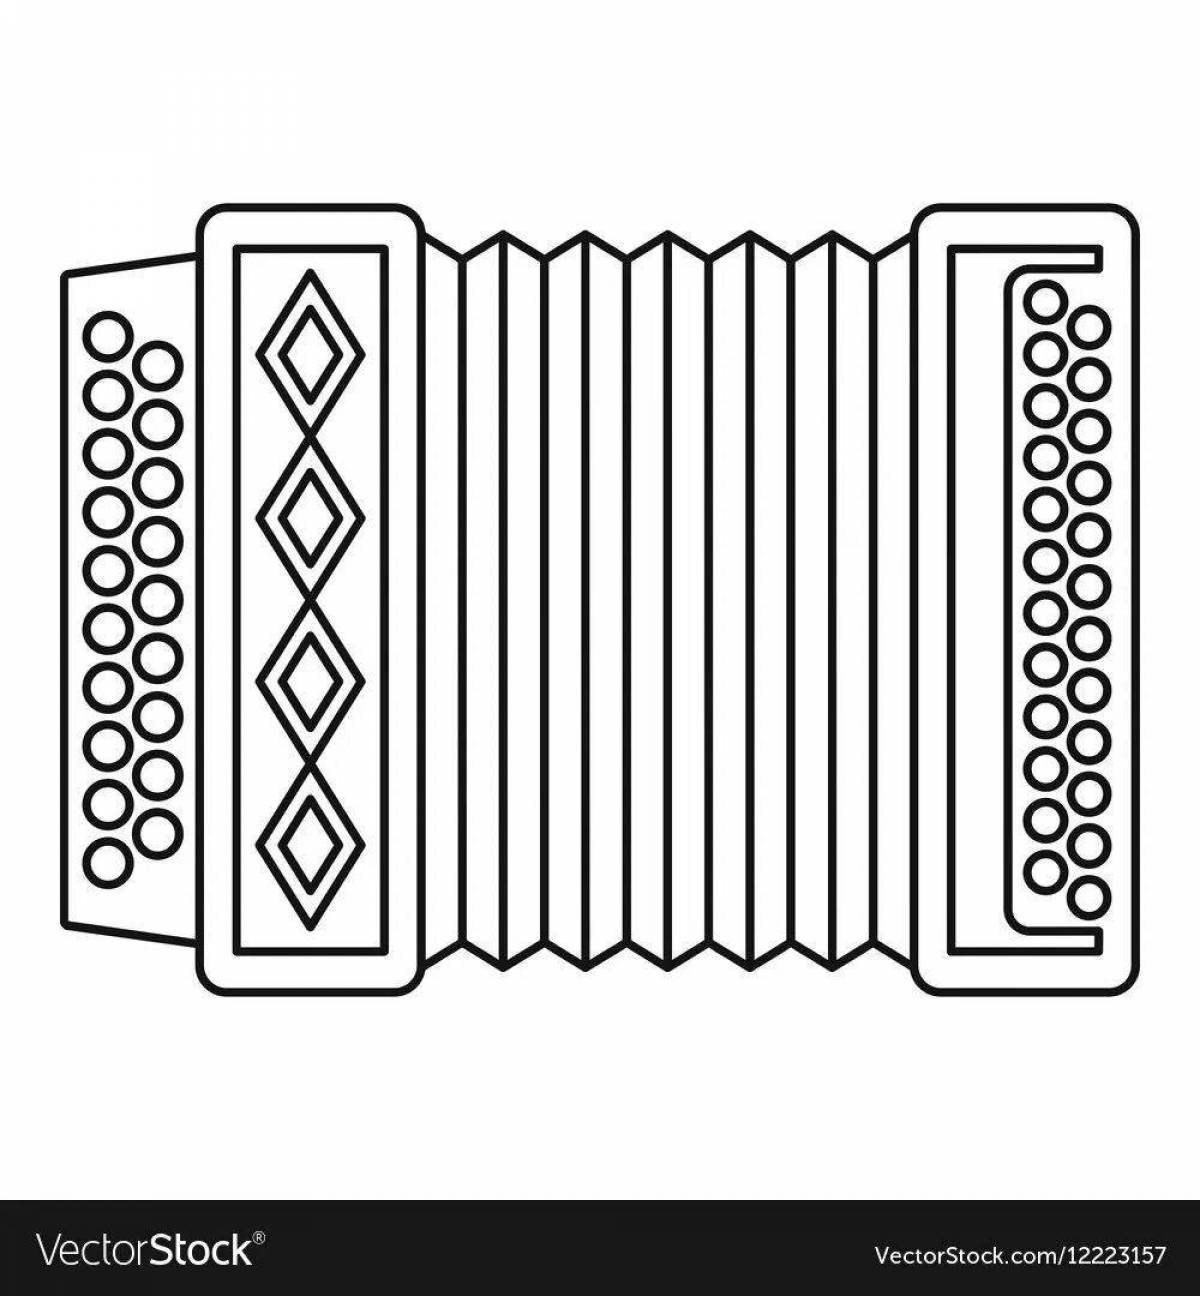 Glowing accordion coloring book for kids